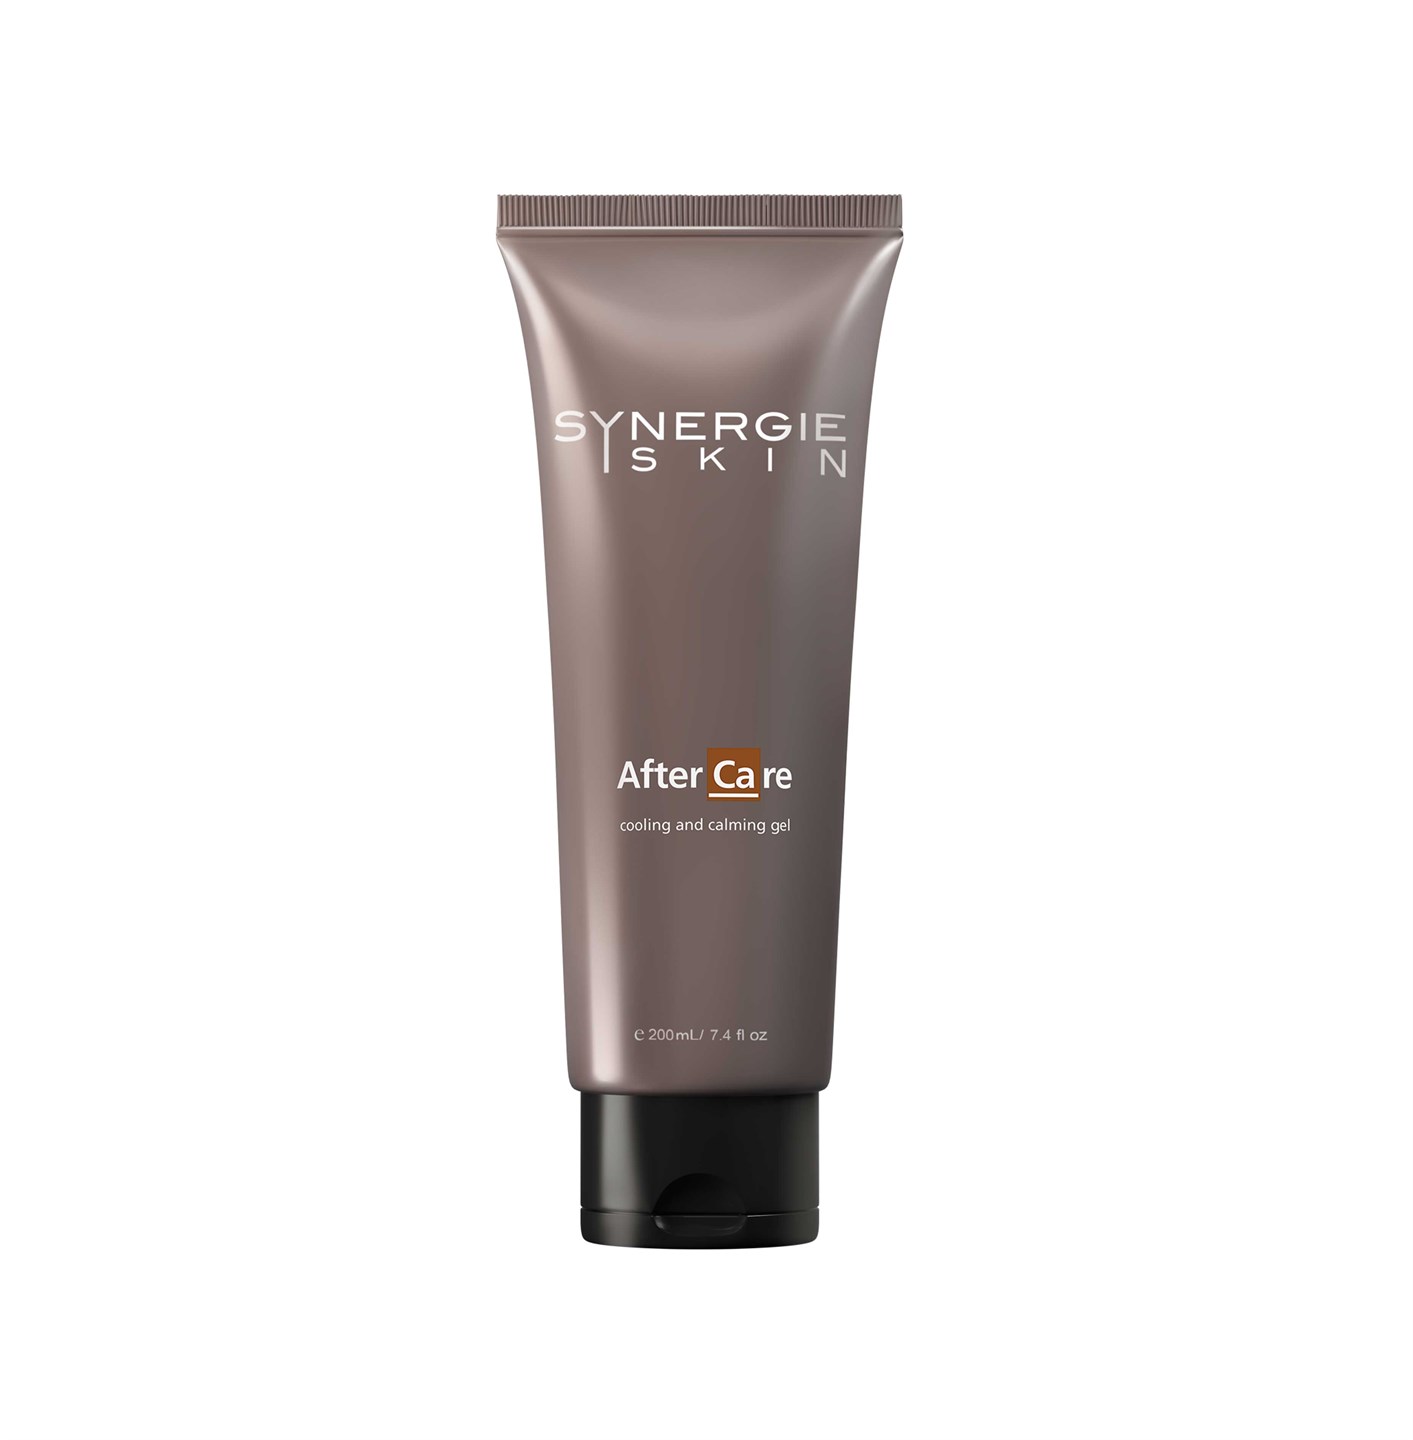 Synergie AfterCare 200ml